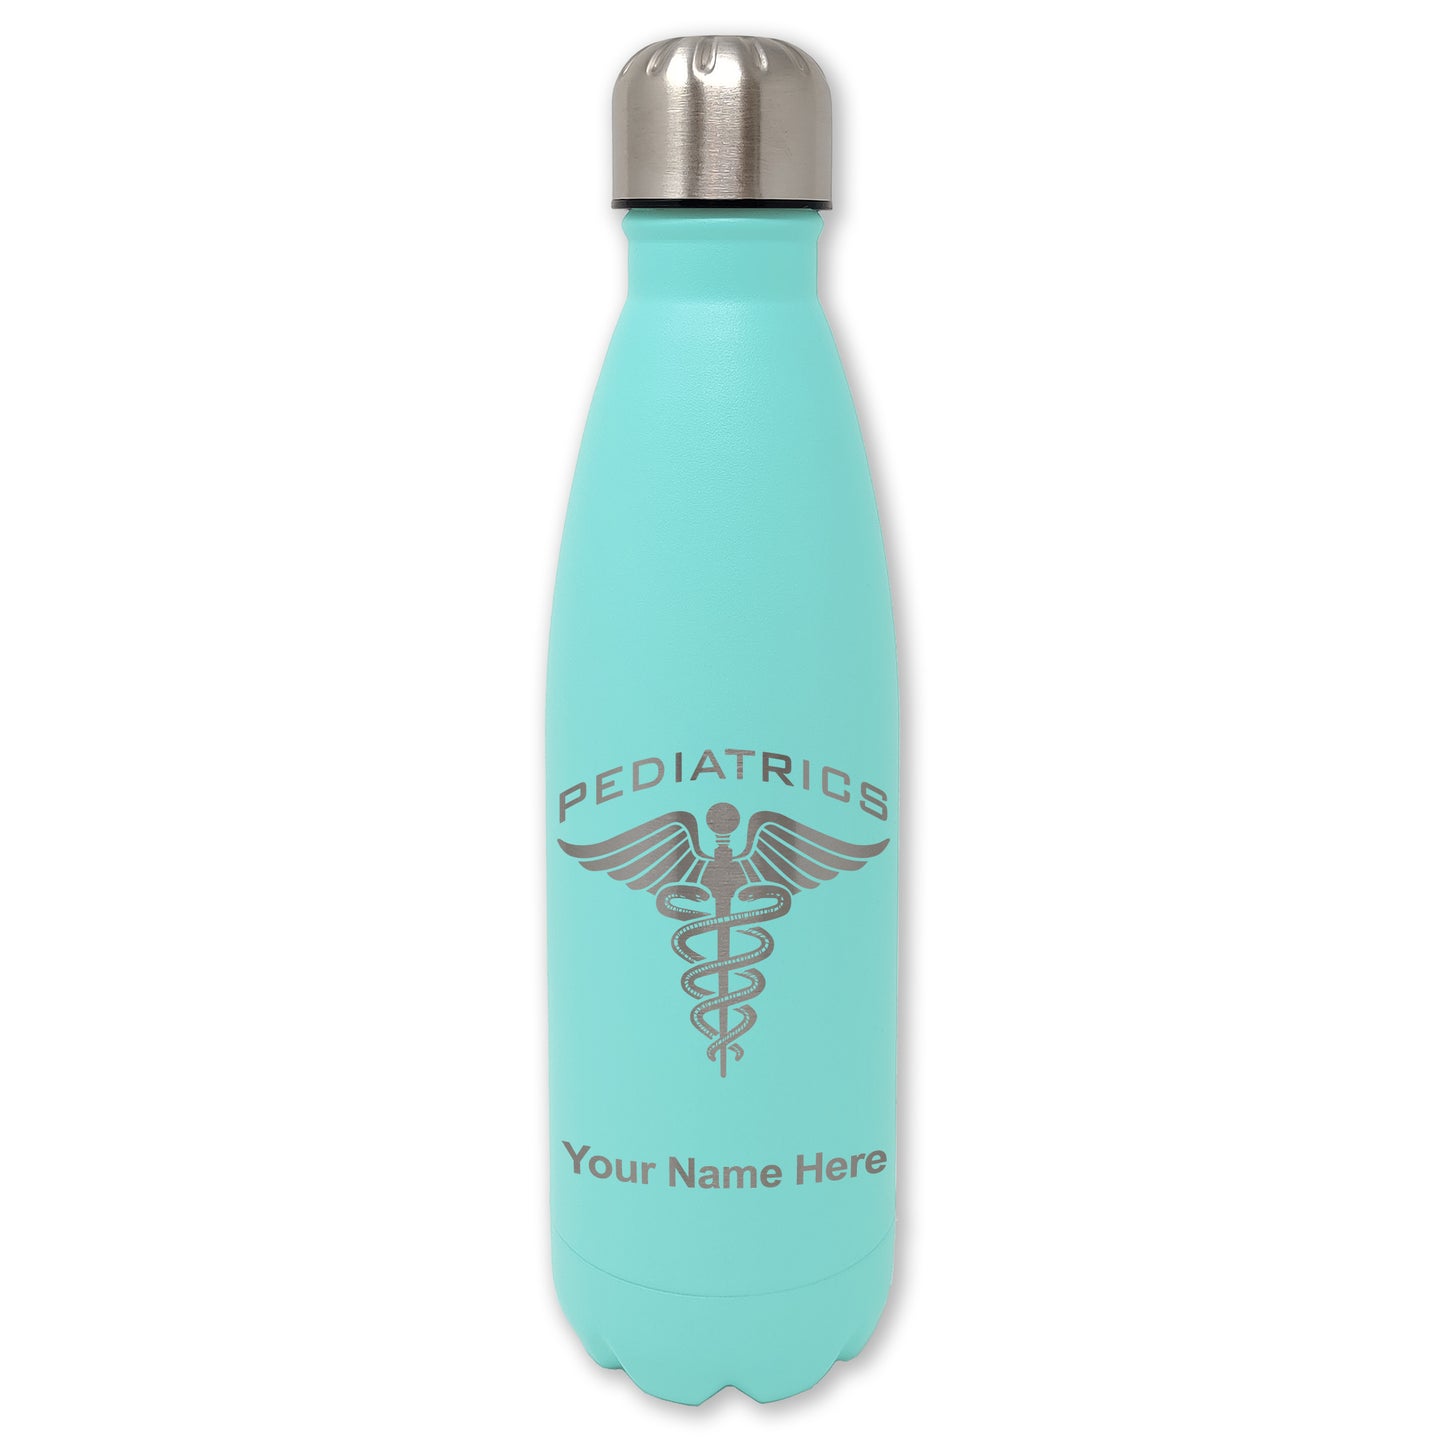 LaserGram Double Wall Water Bottle, Pediatrics, Personalized Engraving Included